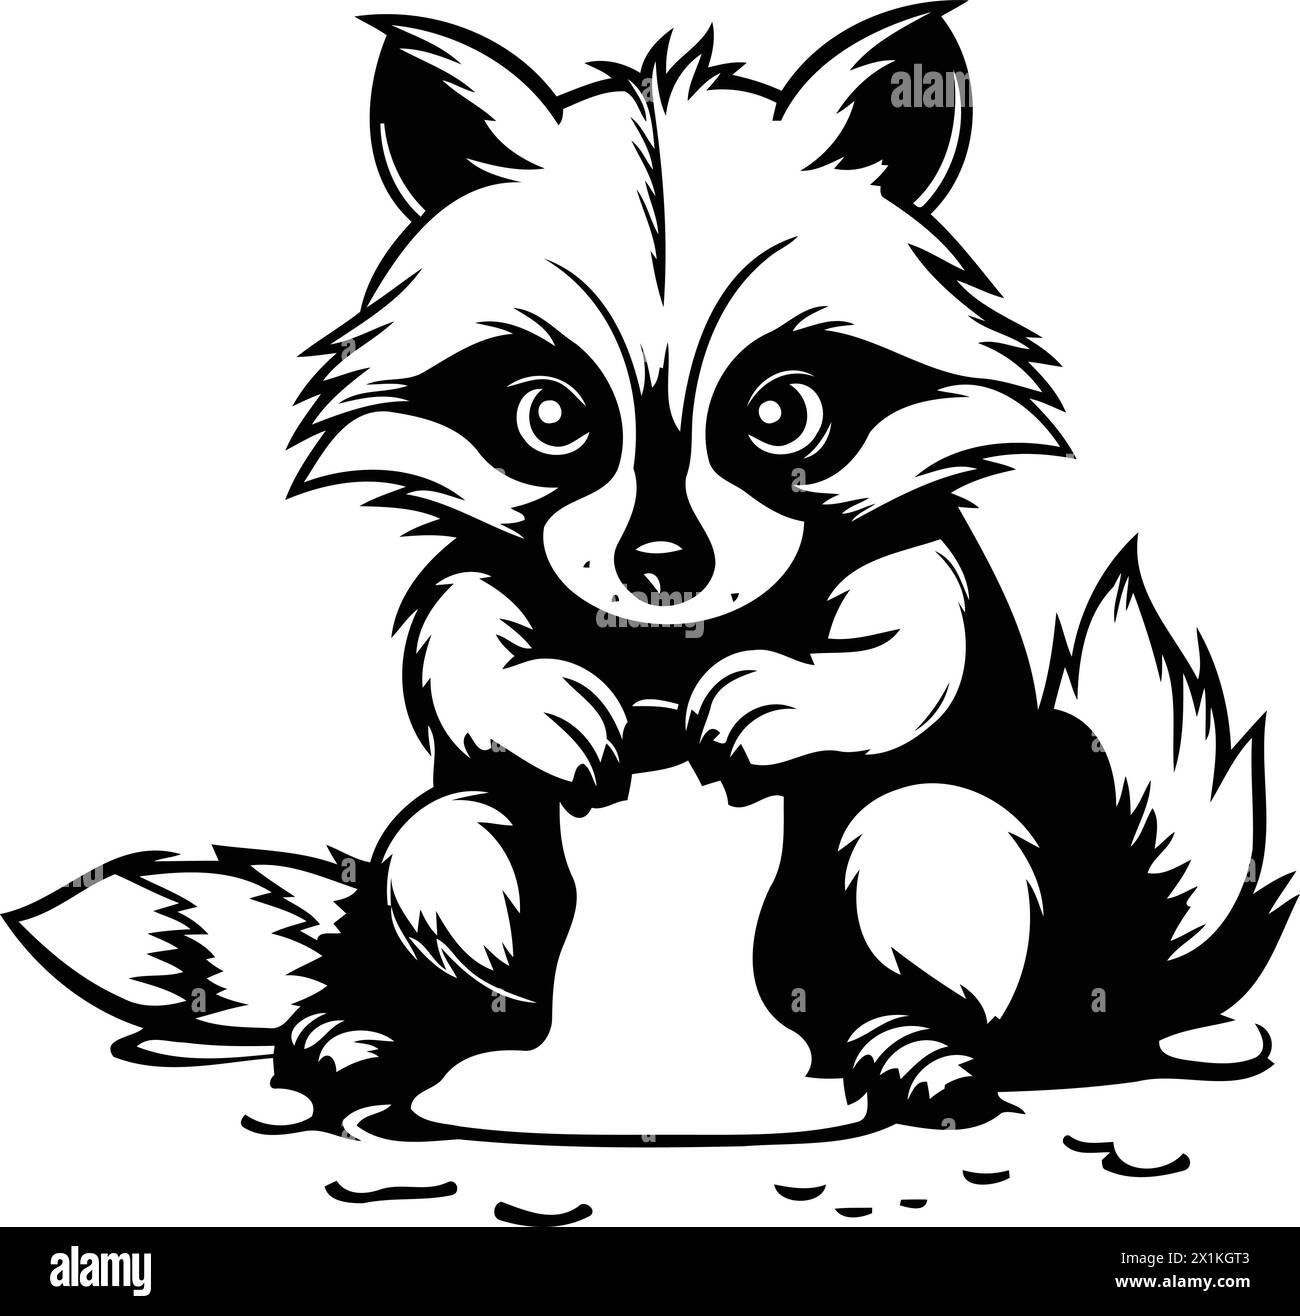 Raccoon drinking water from a bottle. Vector illustration on white background. Stock Vector